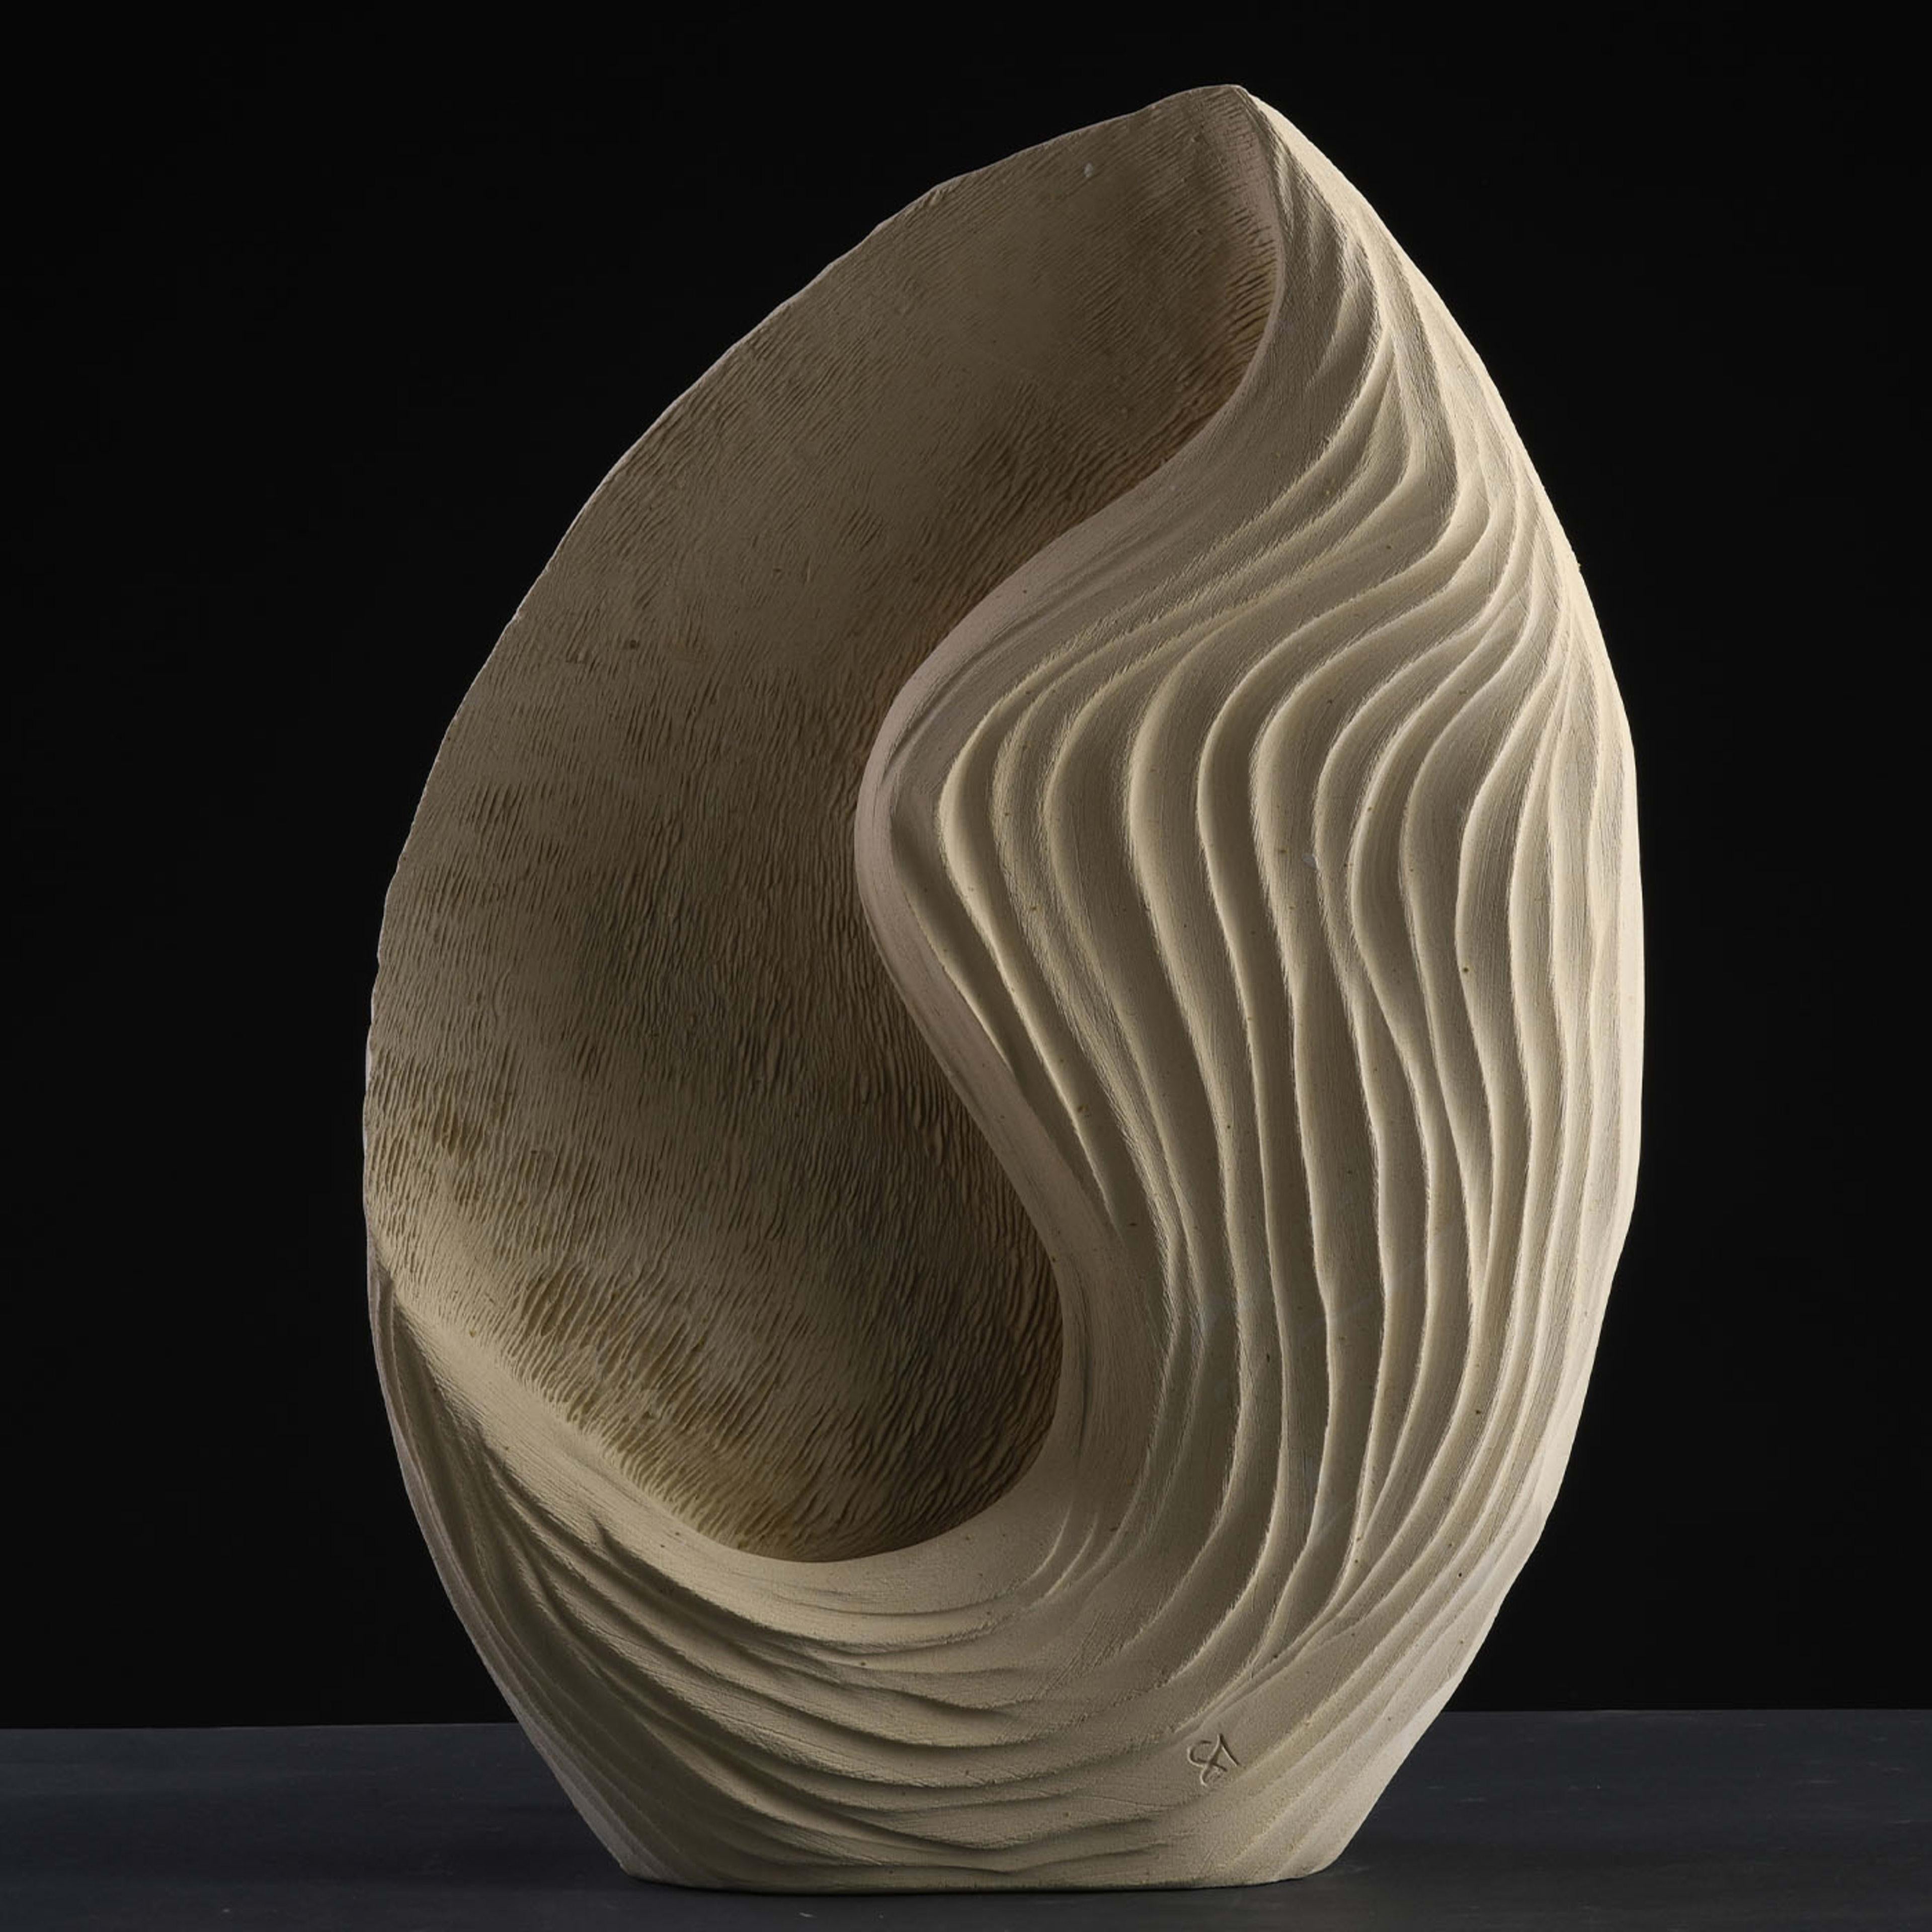 Inspired by the wind rippling the ocean's surface, pleats where light seeps in mark this singular luminous sculpture. A special marine-origin stone rich in fossils that can only be quarried near Lecce, Apulia is the one artist Andrea Serra selects